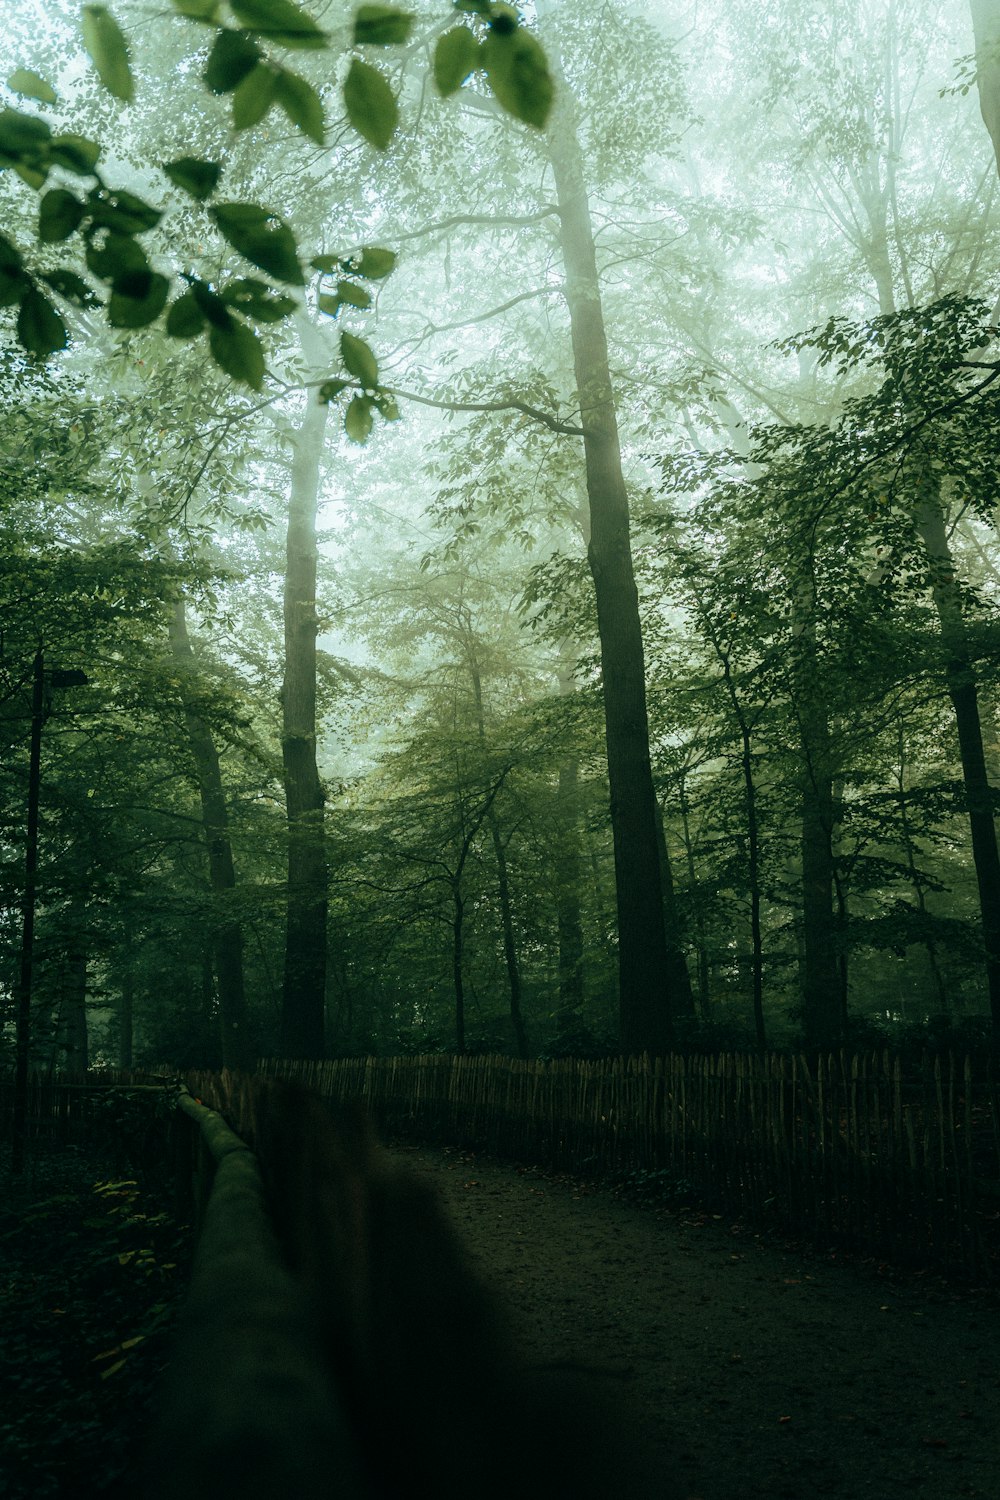 a path through a forest with tall trees